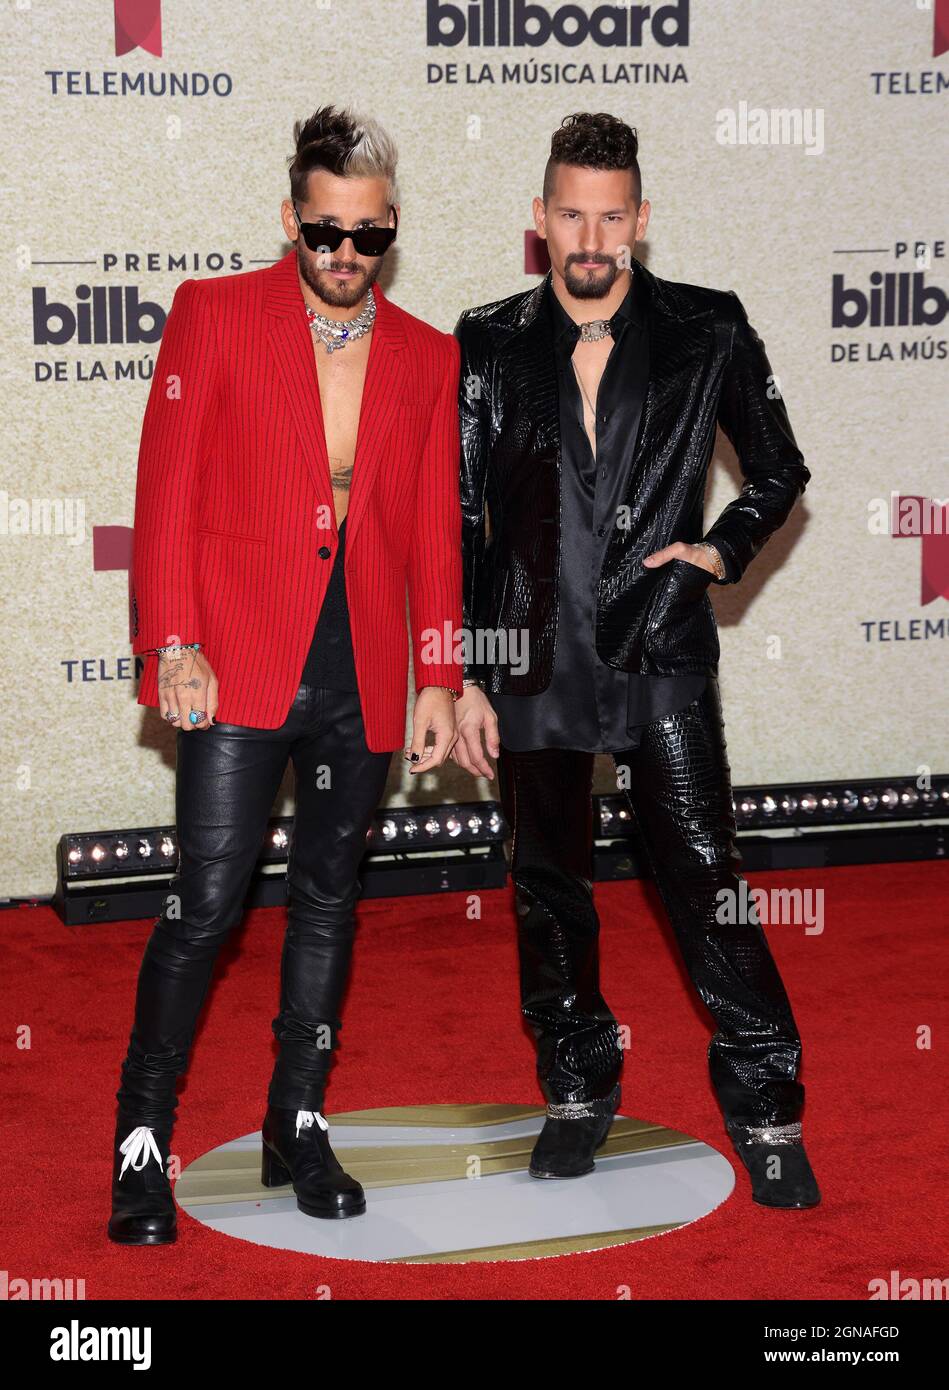 Miami, United States Of America. 23rd Sep, 2021. PREMIOS BILLBOARD DE LA MÚSICA LATINA 2021 -- Mau y Ricky on the red carpet at the Watsco Center in Coral Gables, FL on September 23, 2021 (Photo by Alberto E. Tamargo/Sipa USA) Credit: Sipa USA/Alamy Live News Stock Photo